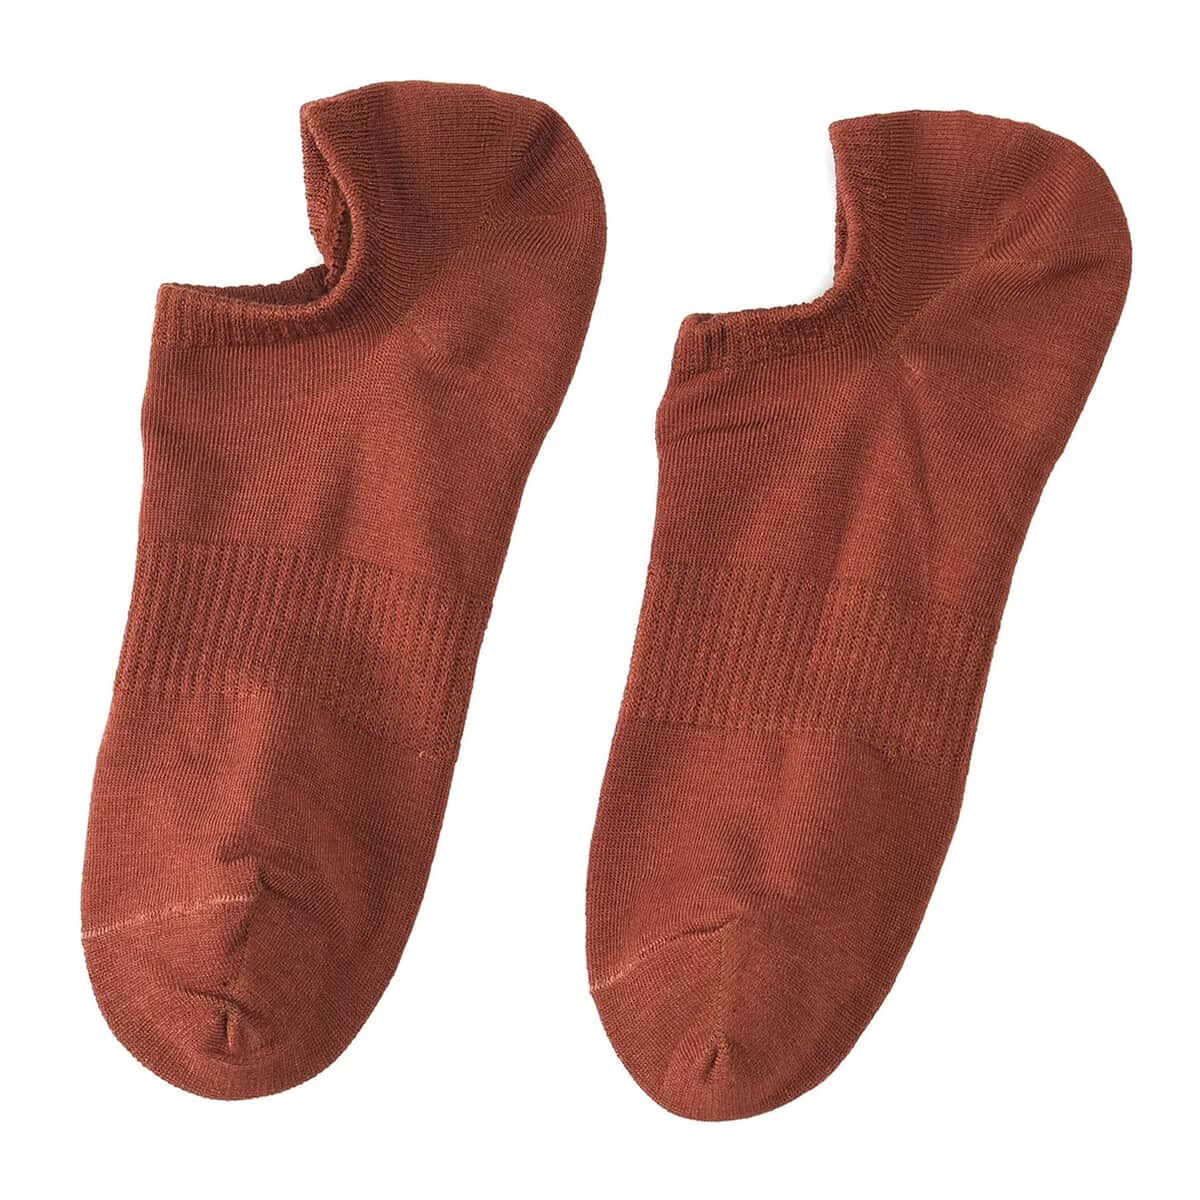 Set of 4 Pair Bamboo Infused Super Low Invisible Socks with Anti-Slip Silicone Heel Grip - Multi Color image number 2